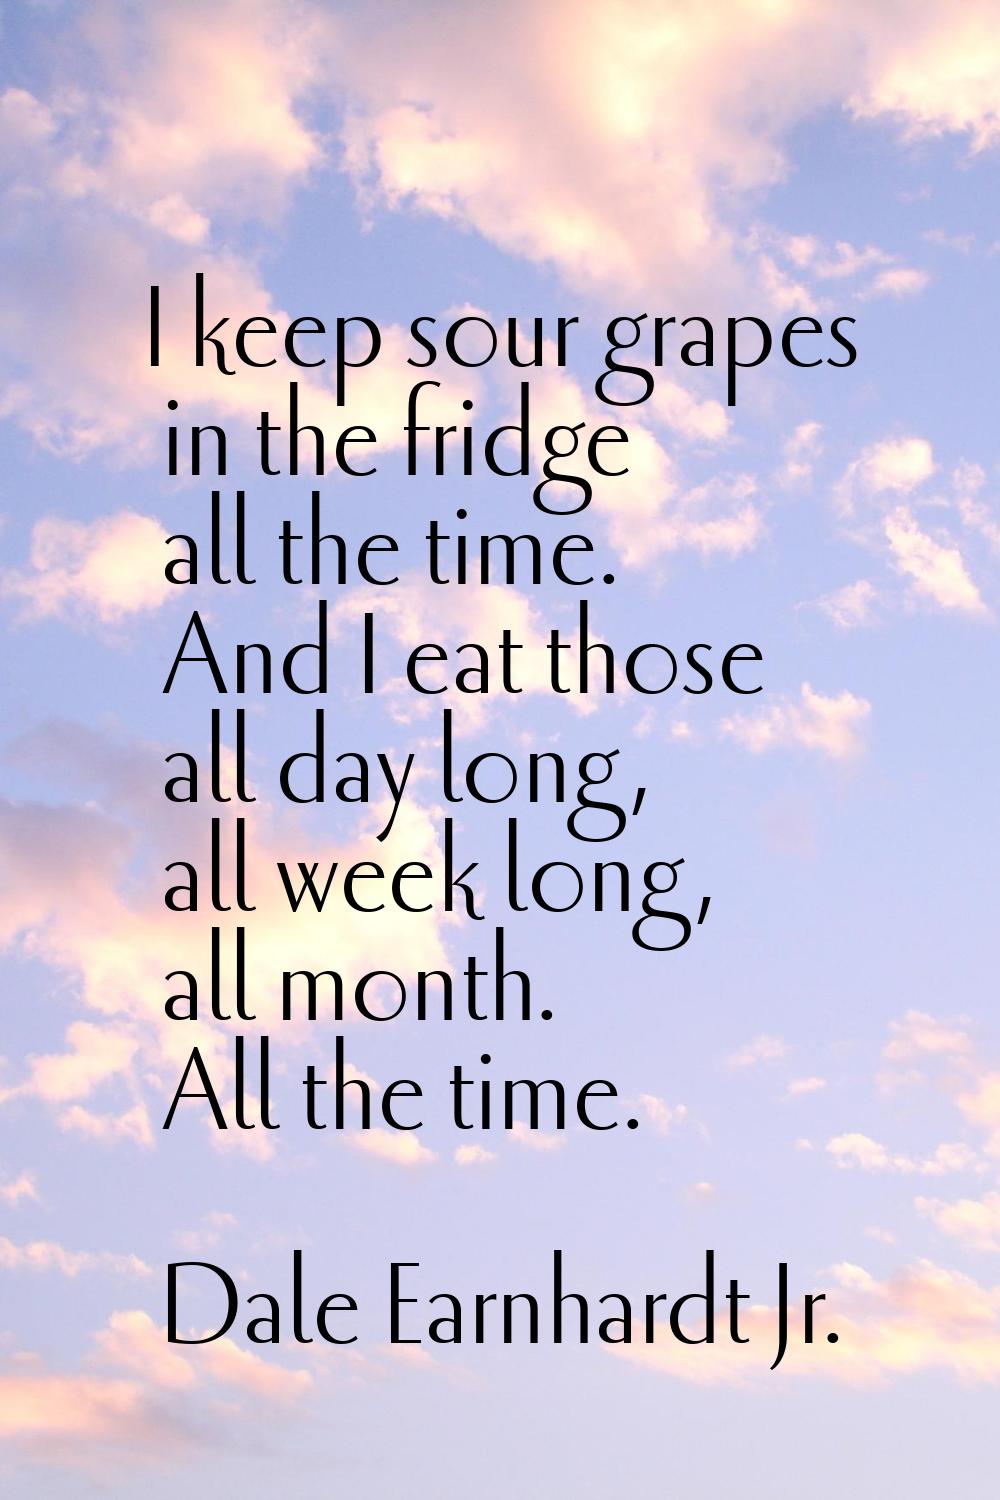 I keep sour grapes in the fridge all the time. And I eat those all day long, all week long, all mon